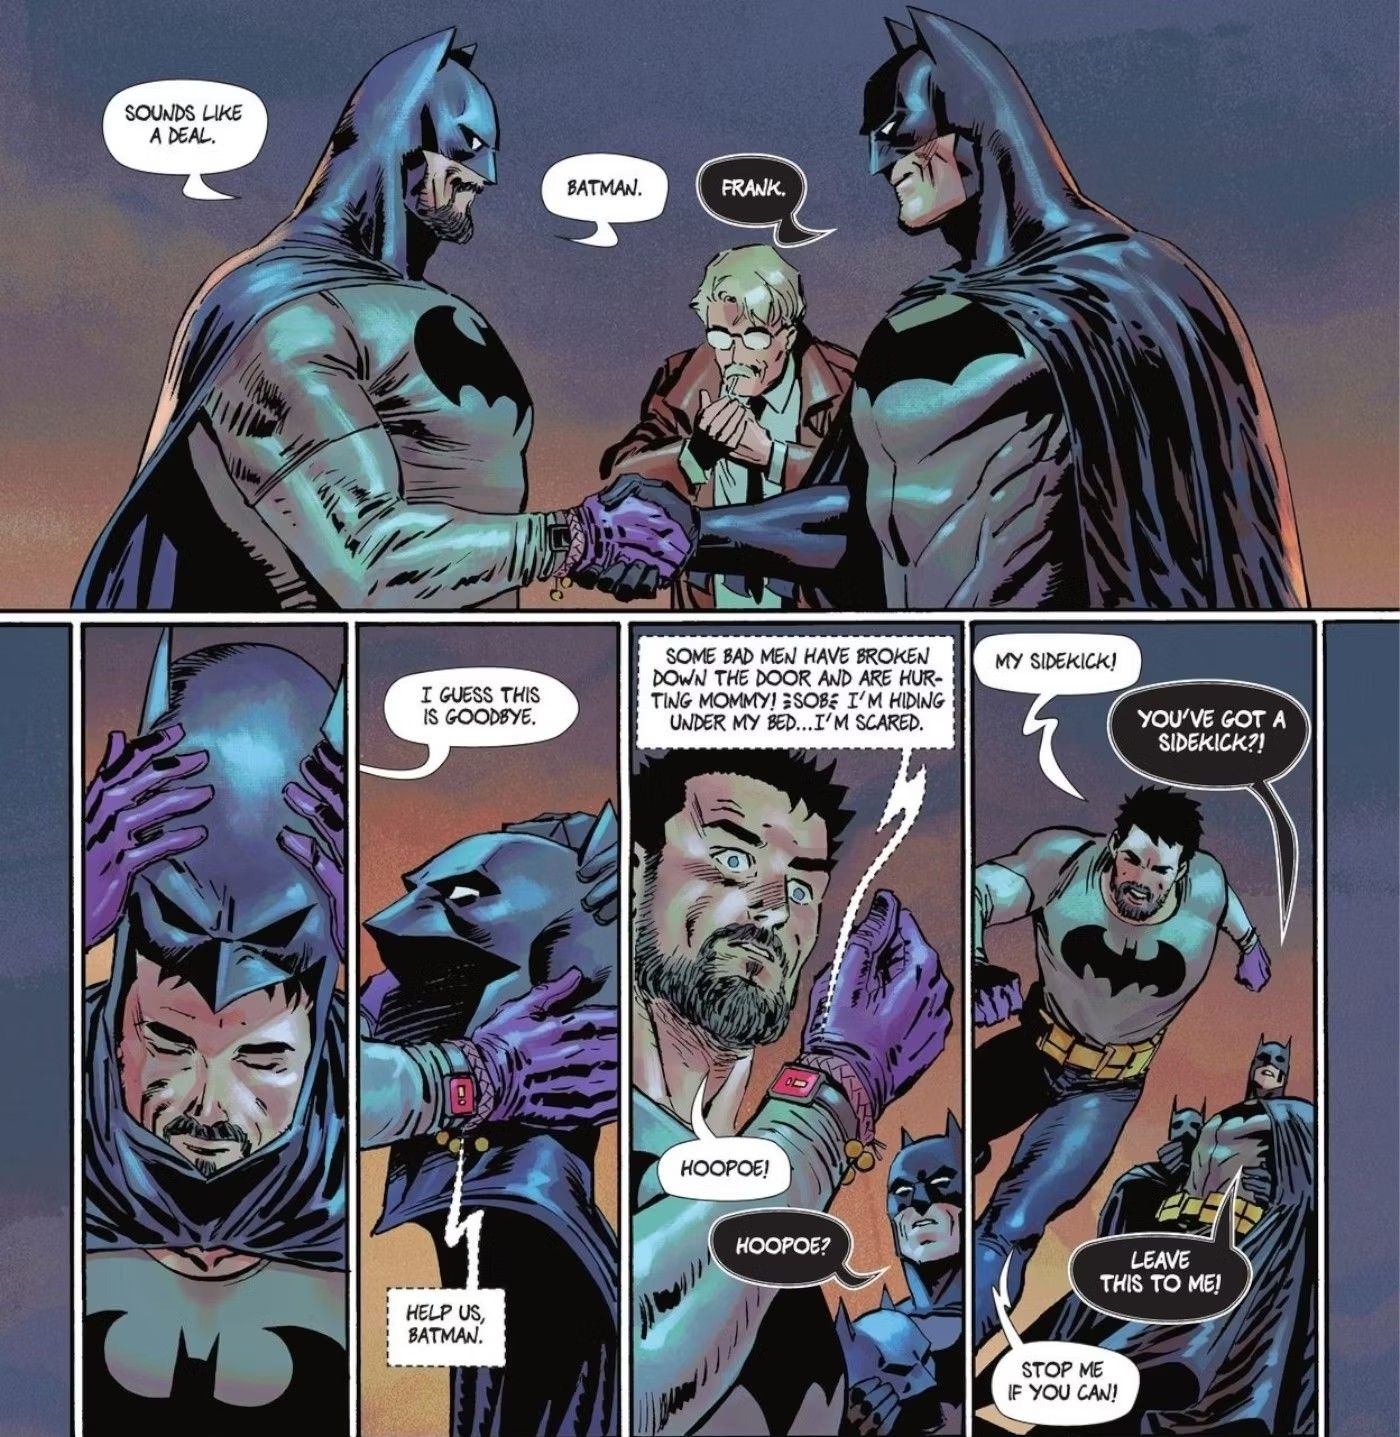 Comic book panels: Two versions of Batman come to an understanding after shaking hands.